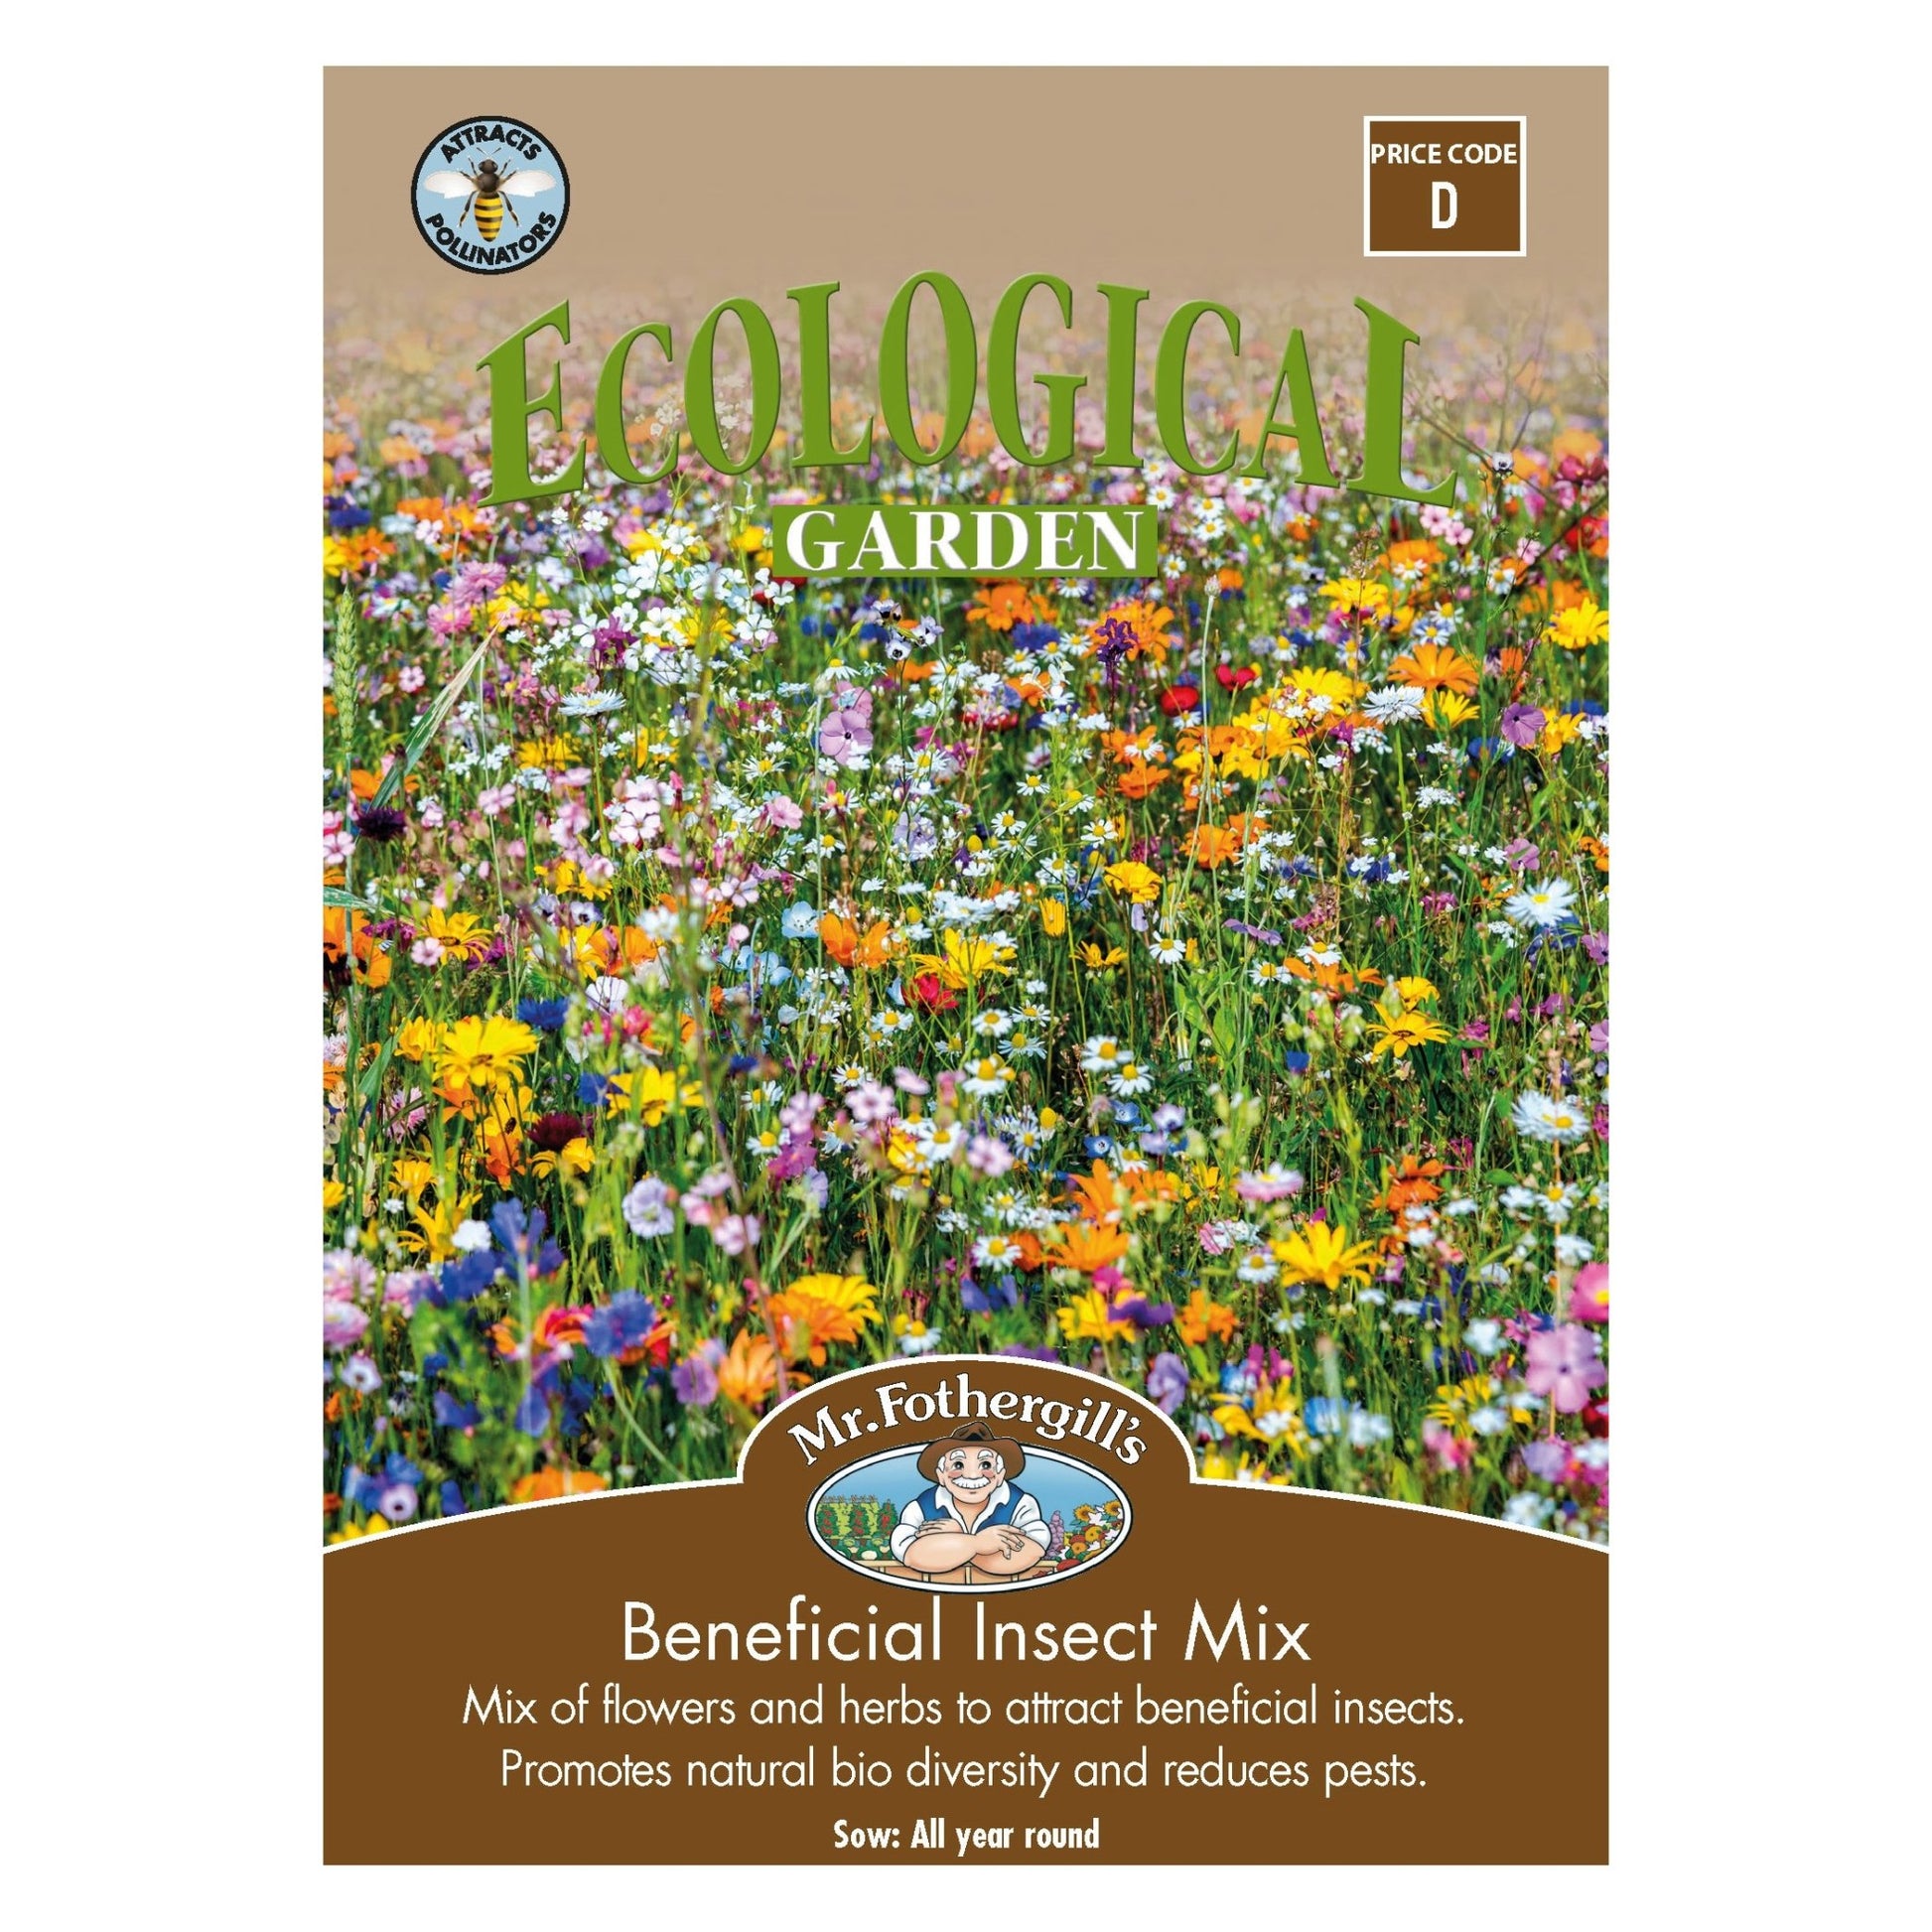 Mr Fothergills Beneficial Insect Mix - Woonona Petfood & Produce